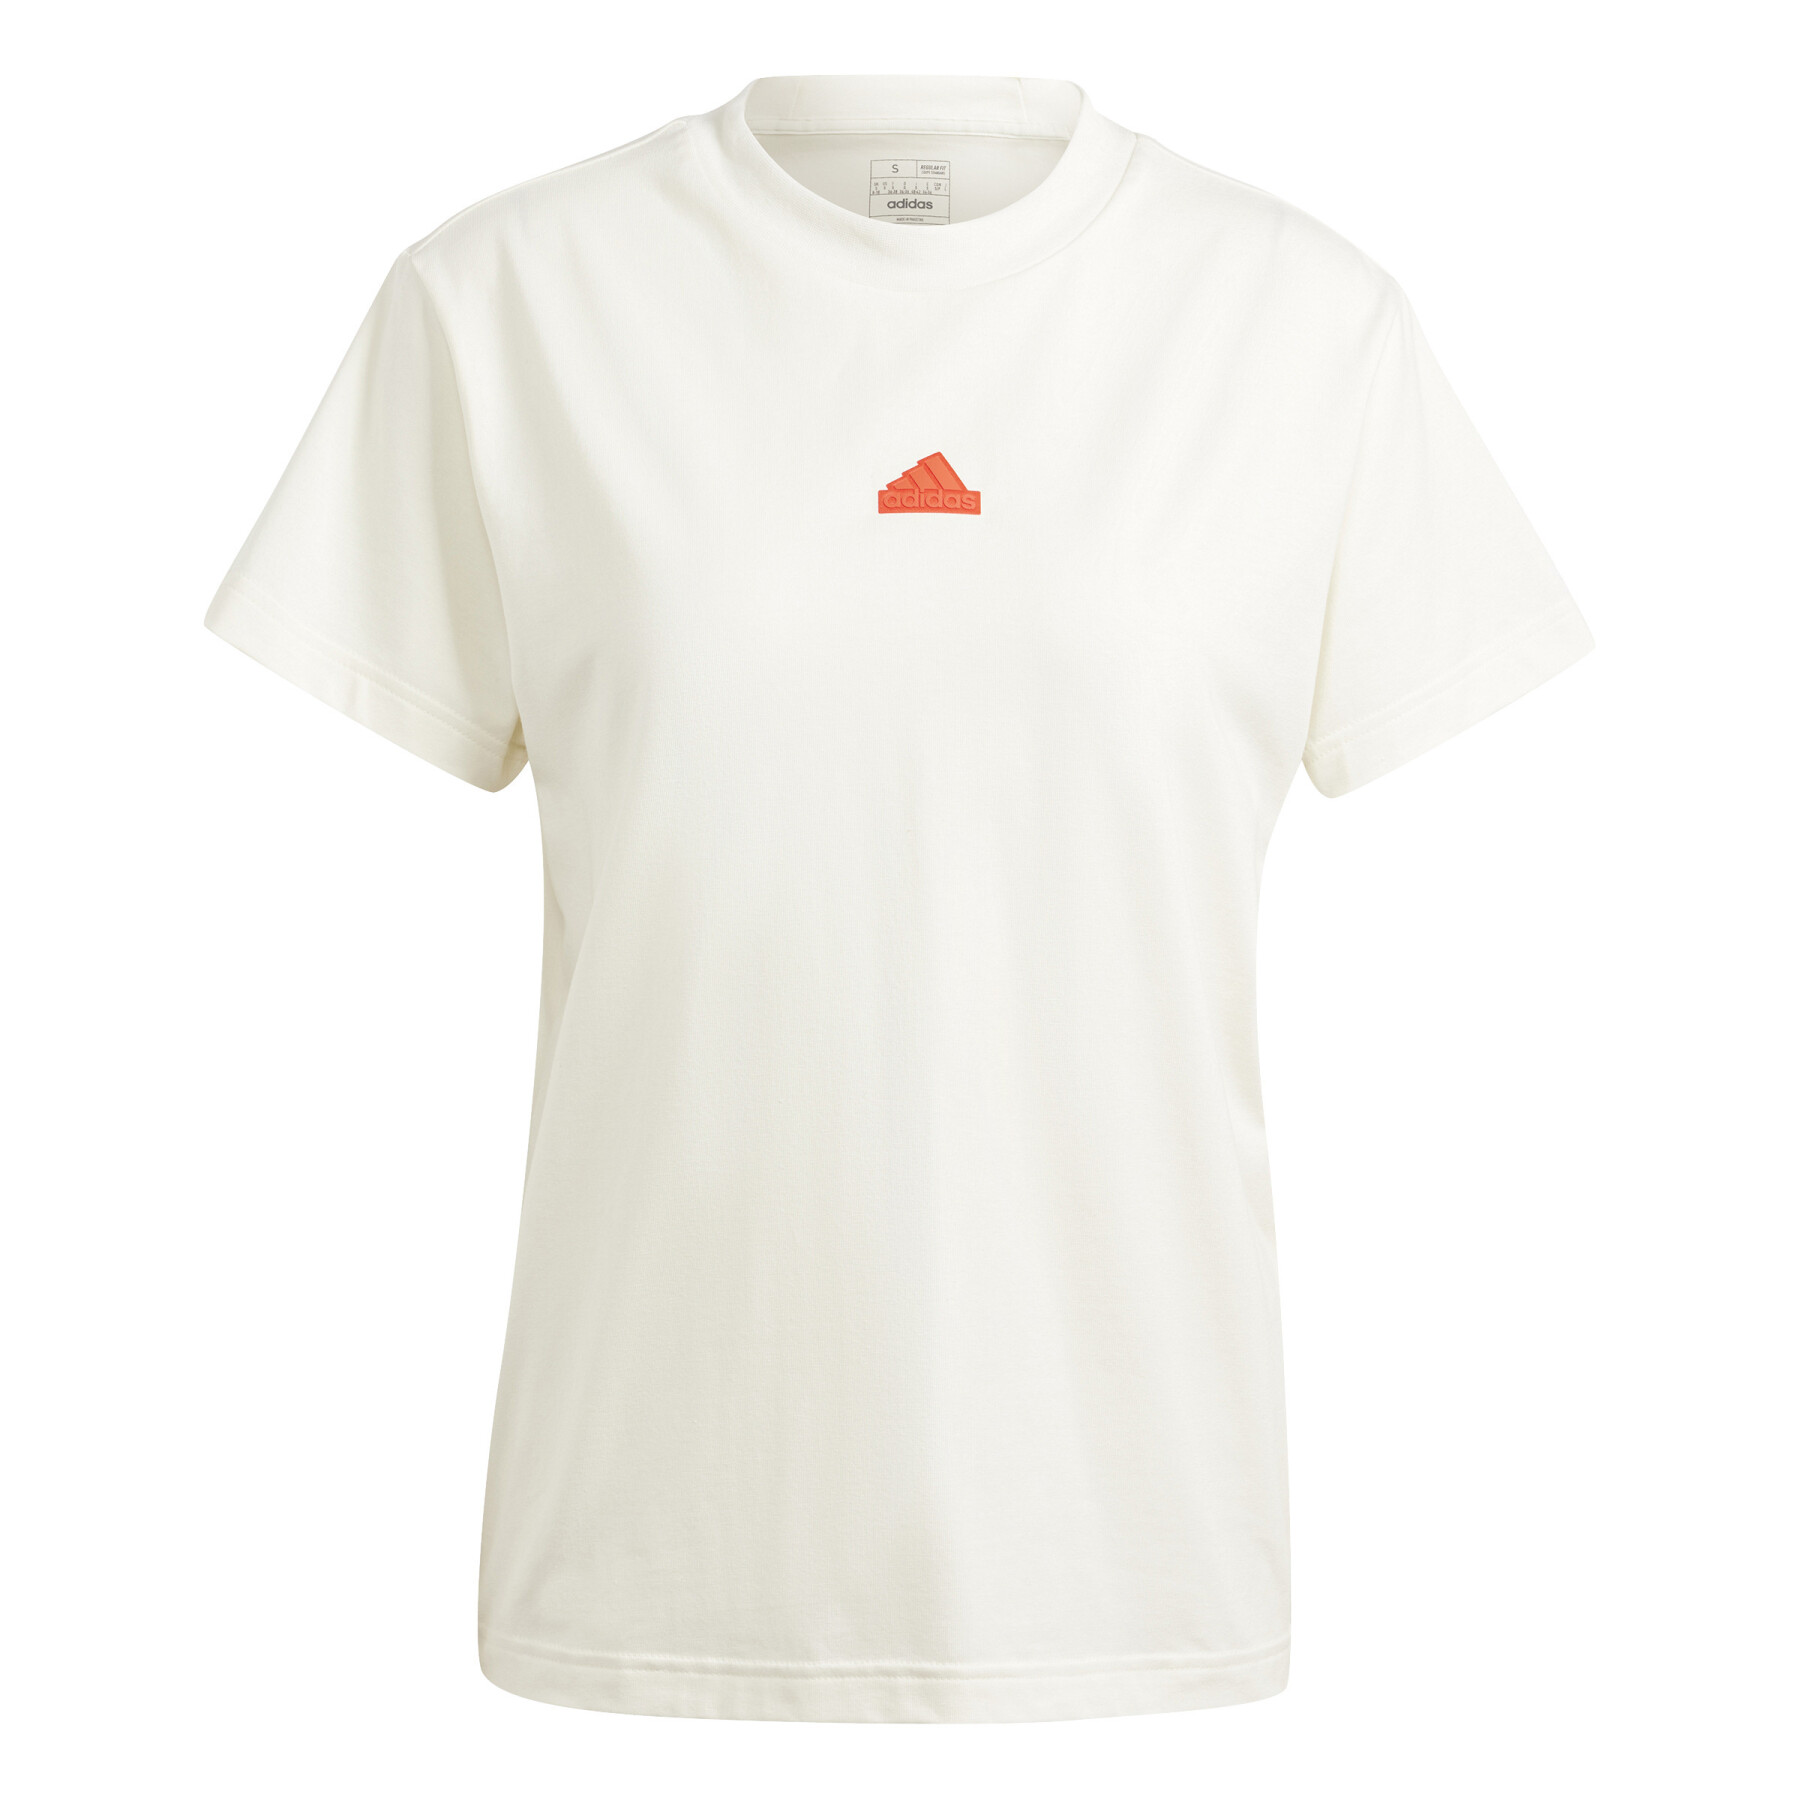 Woman's embroidered T-shirt adidas